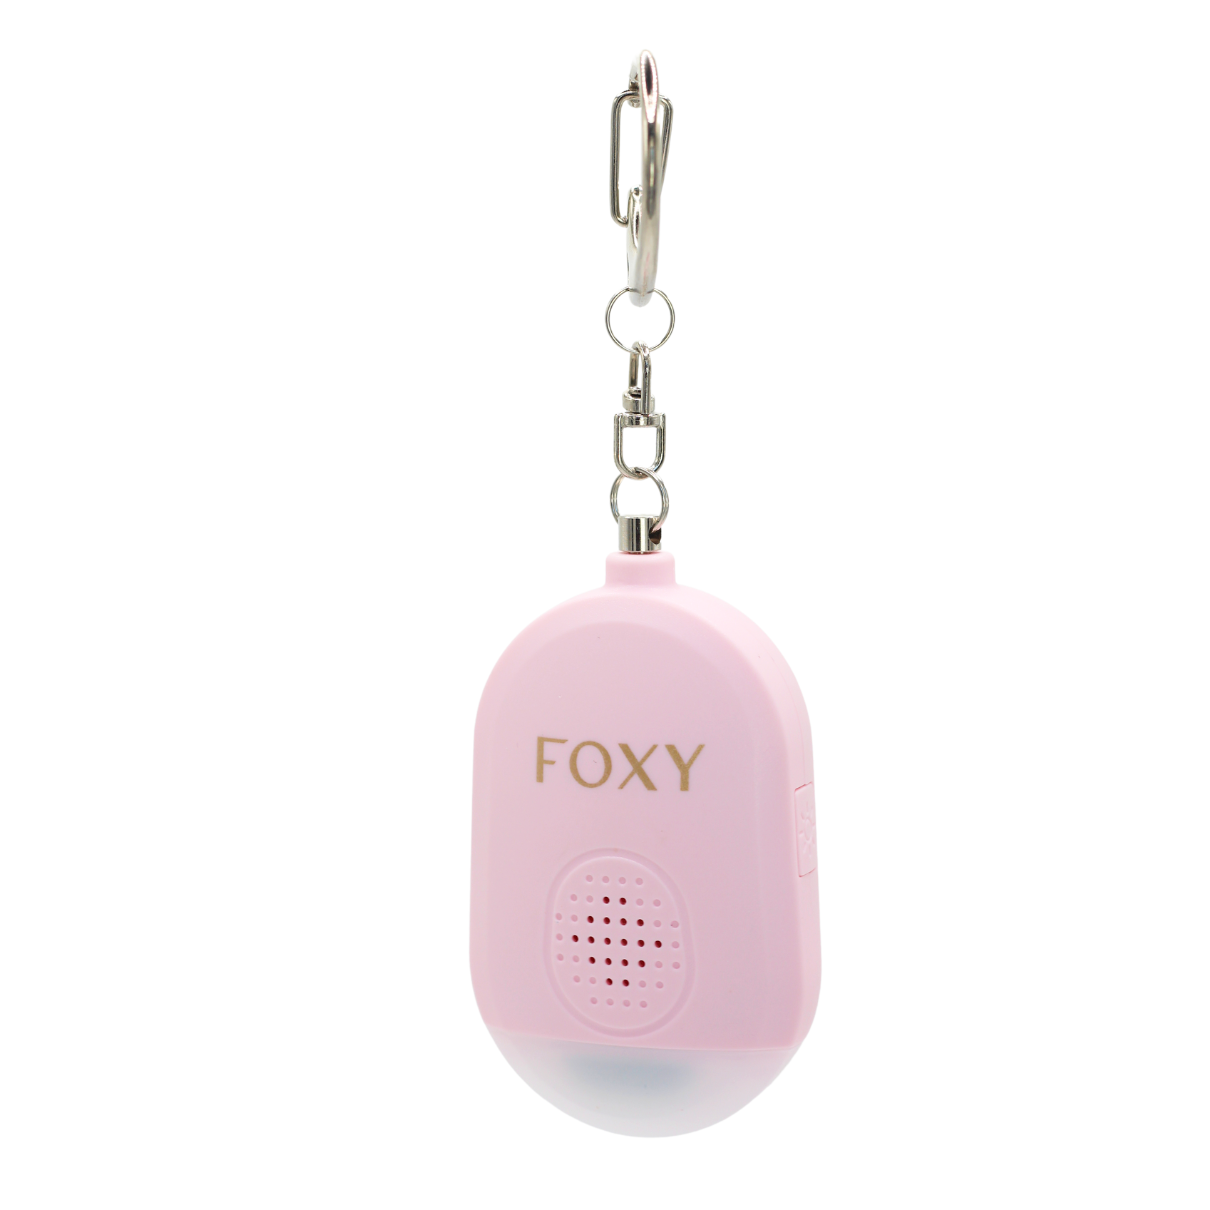 Foxy Alarm - Personal Protection Device